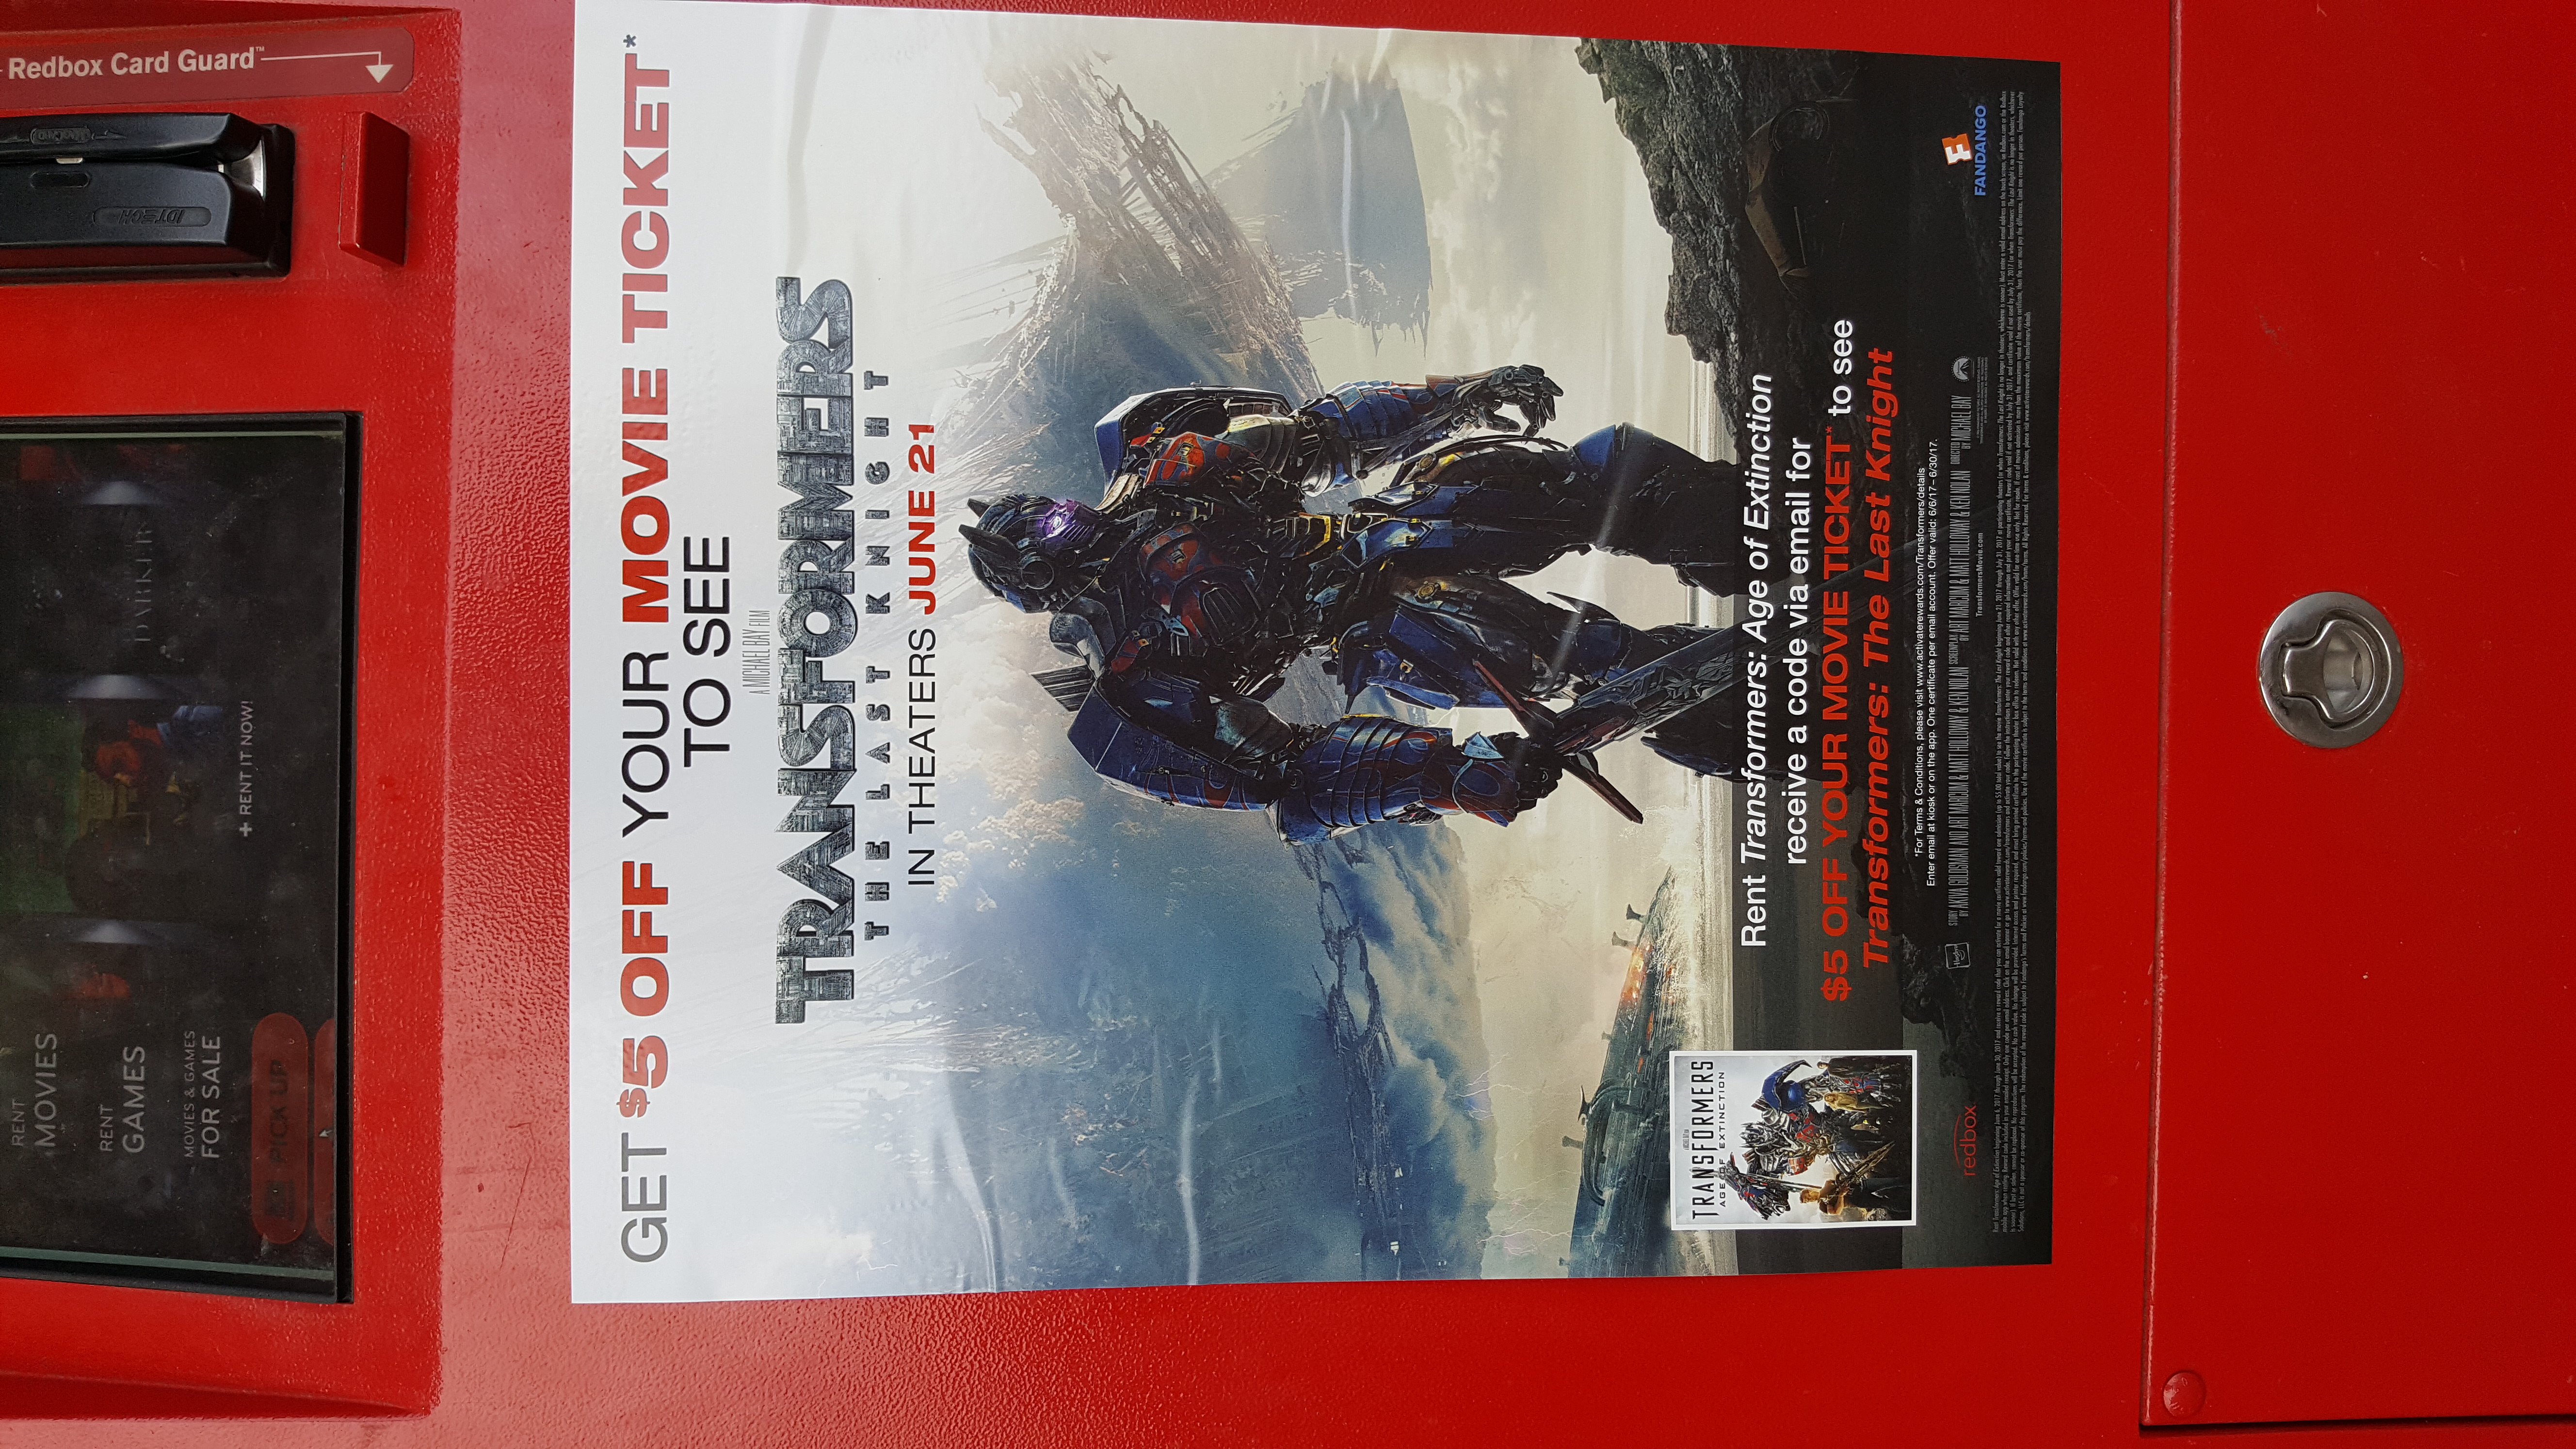 In my Redbox email (2023), they are offering Transformers: The